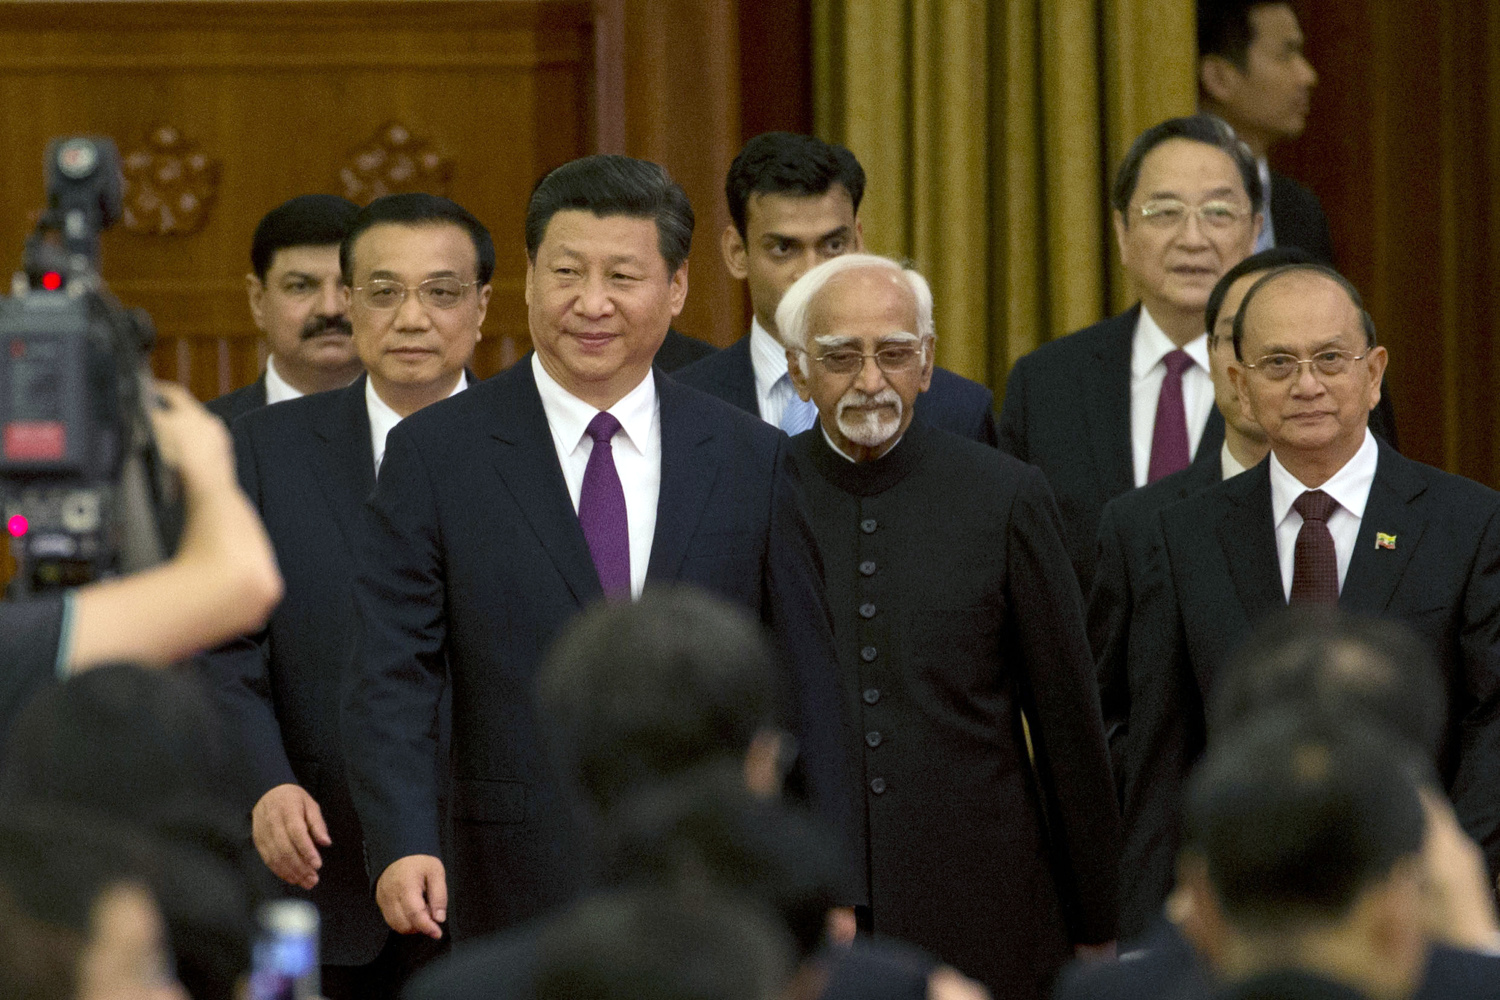 Chinese President Xi Jinping, third from left, Chinese Premier Li Keqiang, second from left, with Indian Vice President Hamid Ansari, at a commemoration of 60 years since their countries agreed to principles of peaceful coexistence. Photo: AP